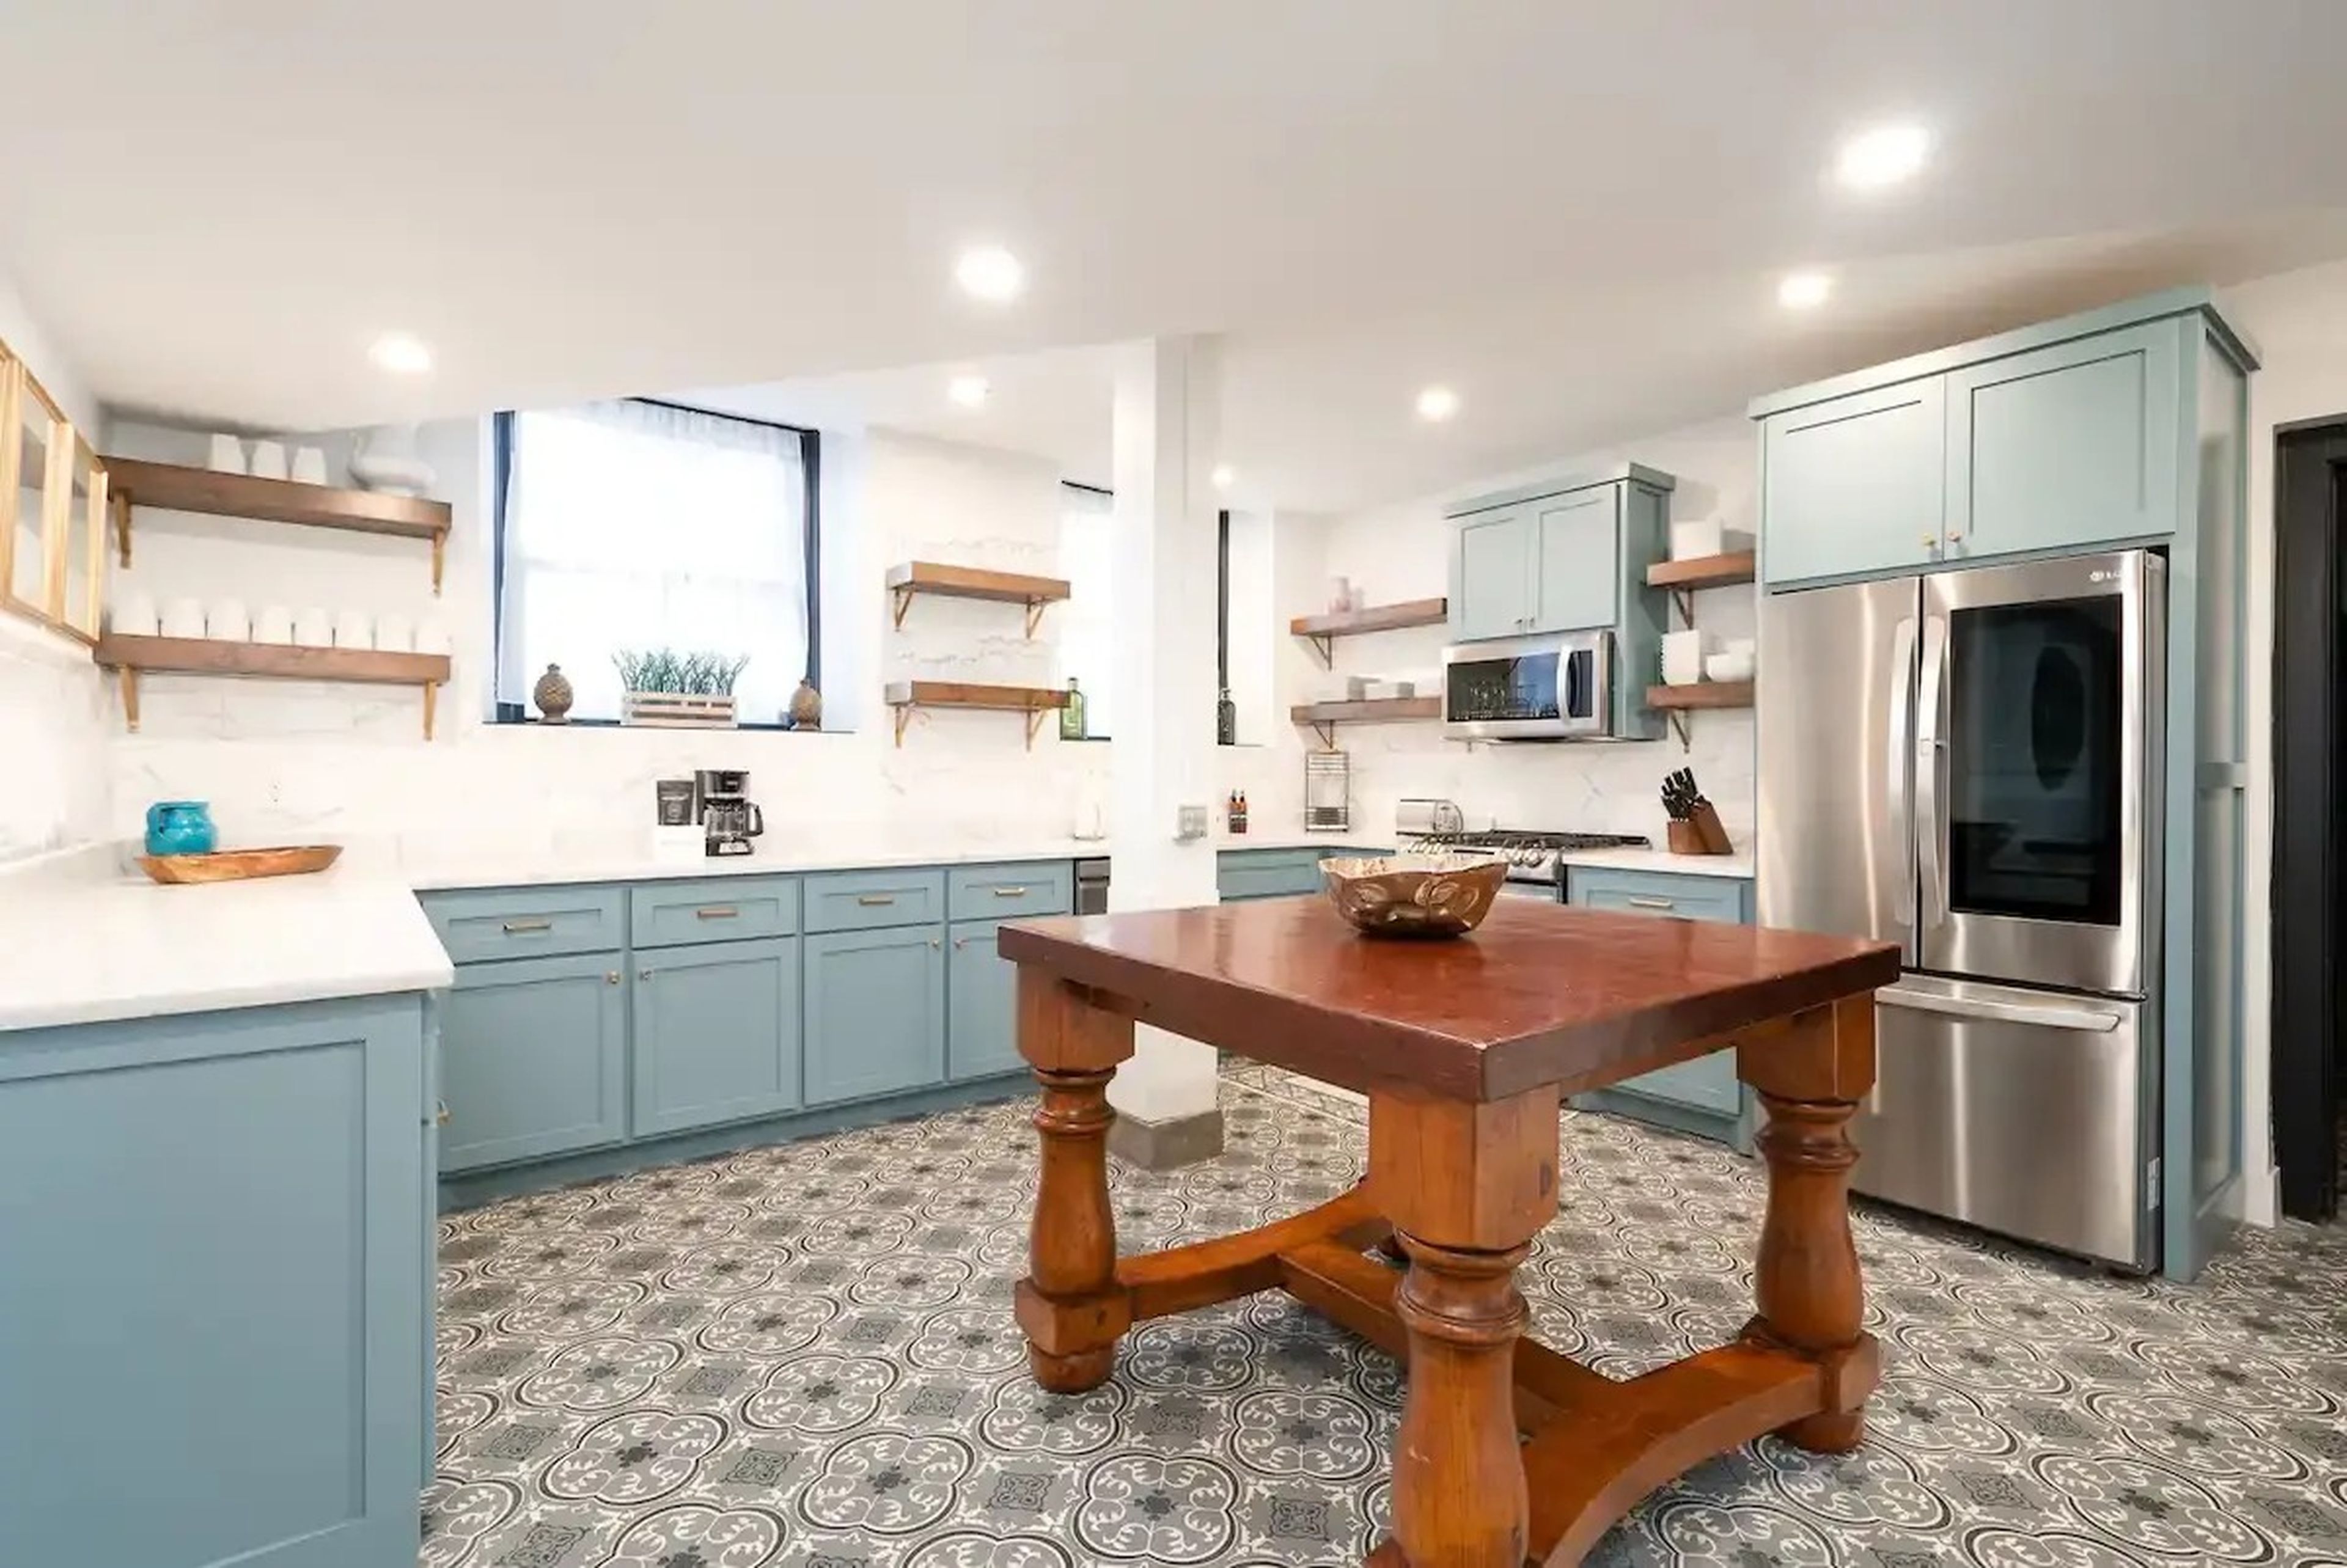 A kitchen with patterned flors, light blue cabinets, white cabinets, and a wood table in the middle.